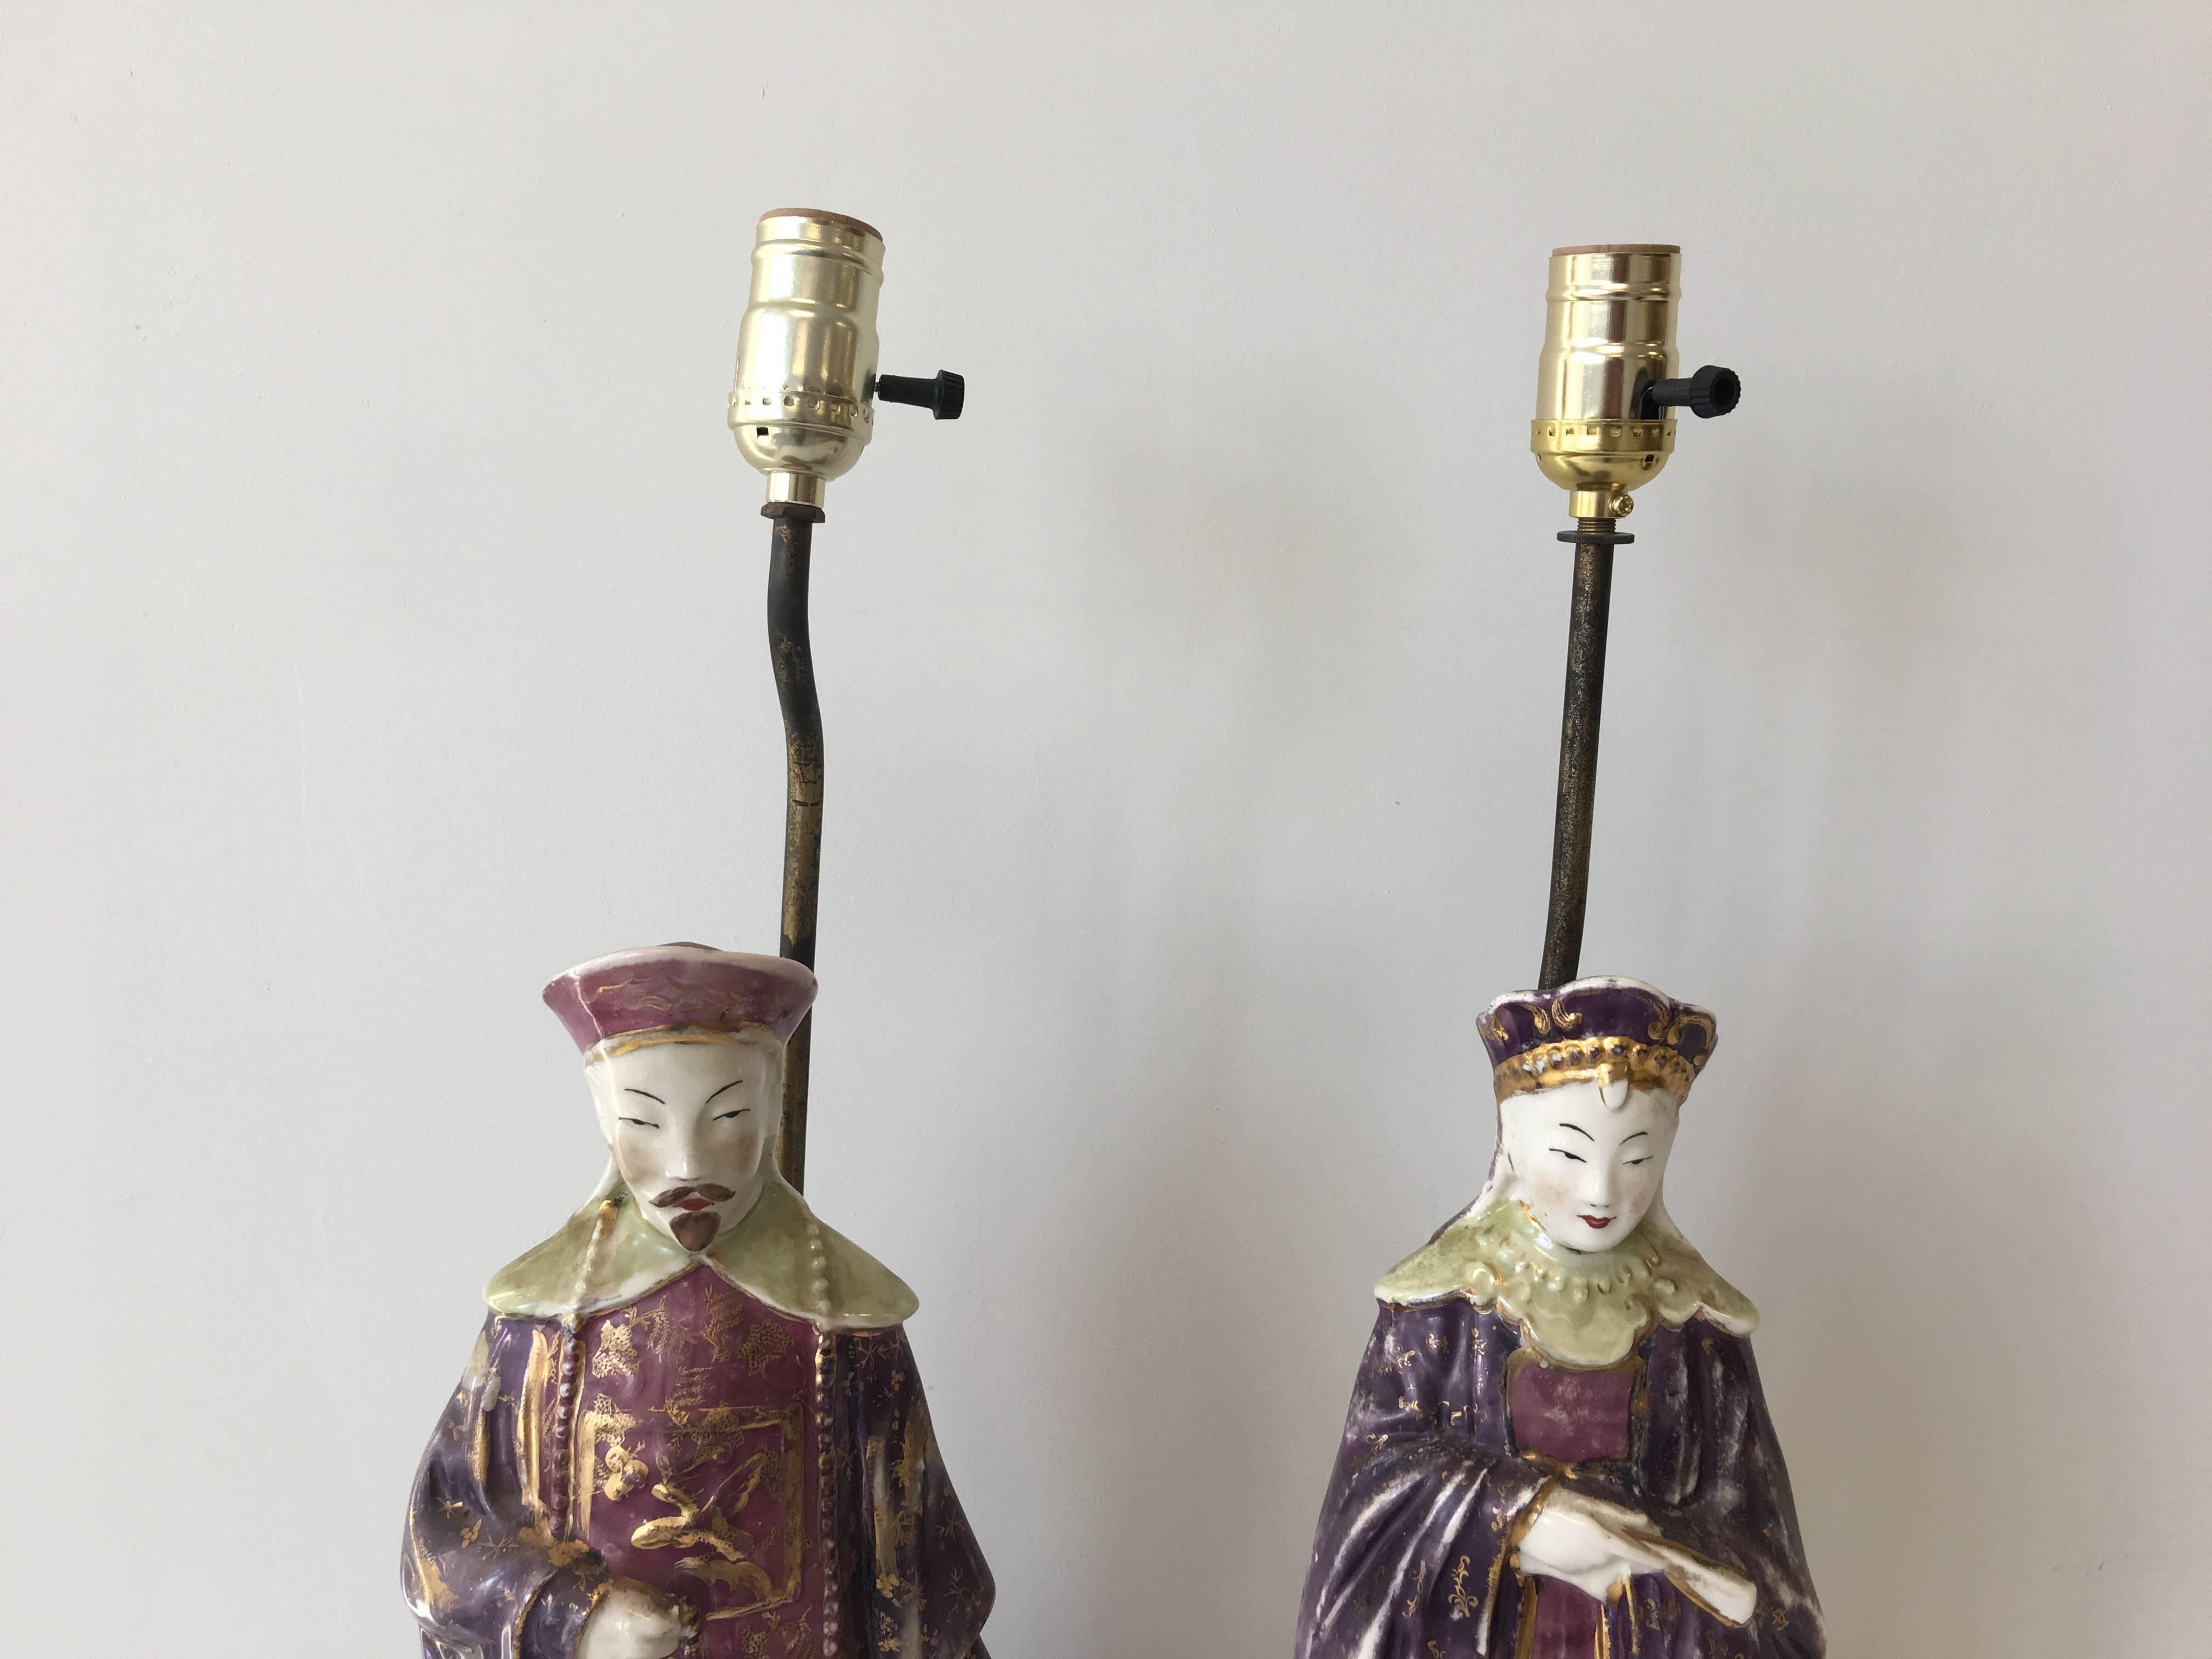 Offered is a stunning pair of 1920s, Asian emperor and empress figural statue lamps. Rested upon decorative bronze bases. Each figure features 18-karat gold accents. Newly rewired. Each figure measures 18